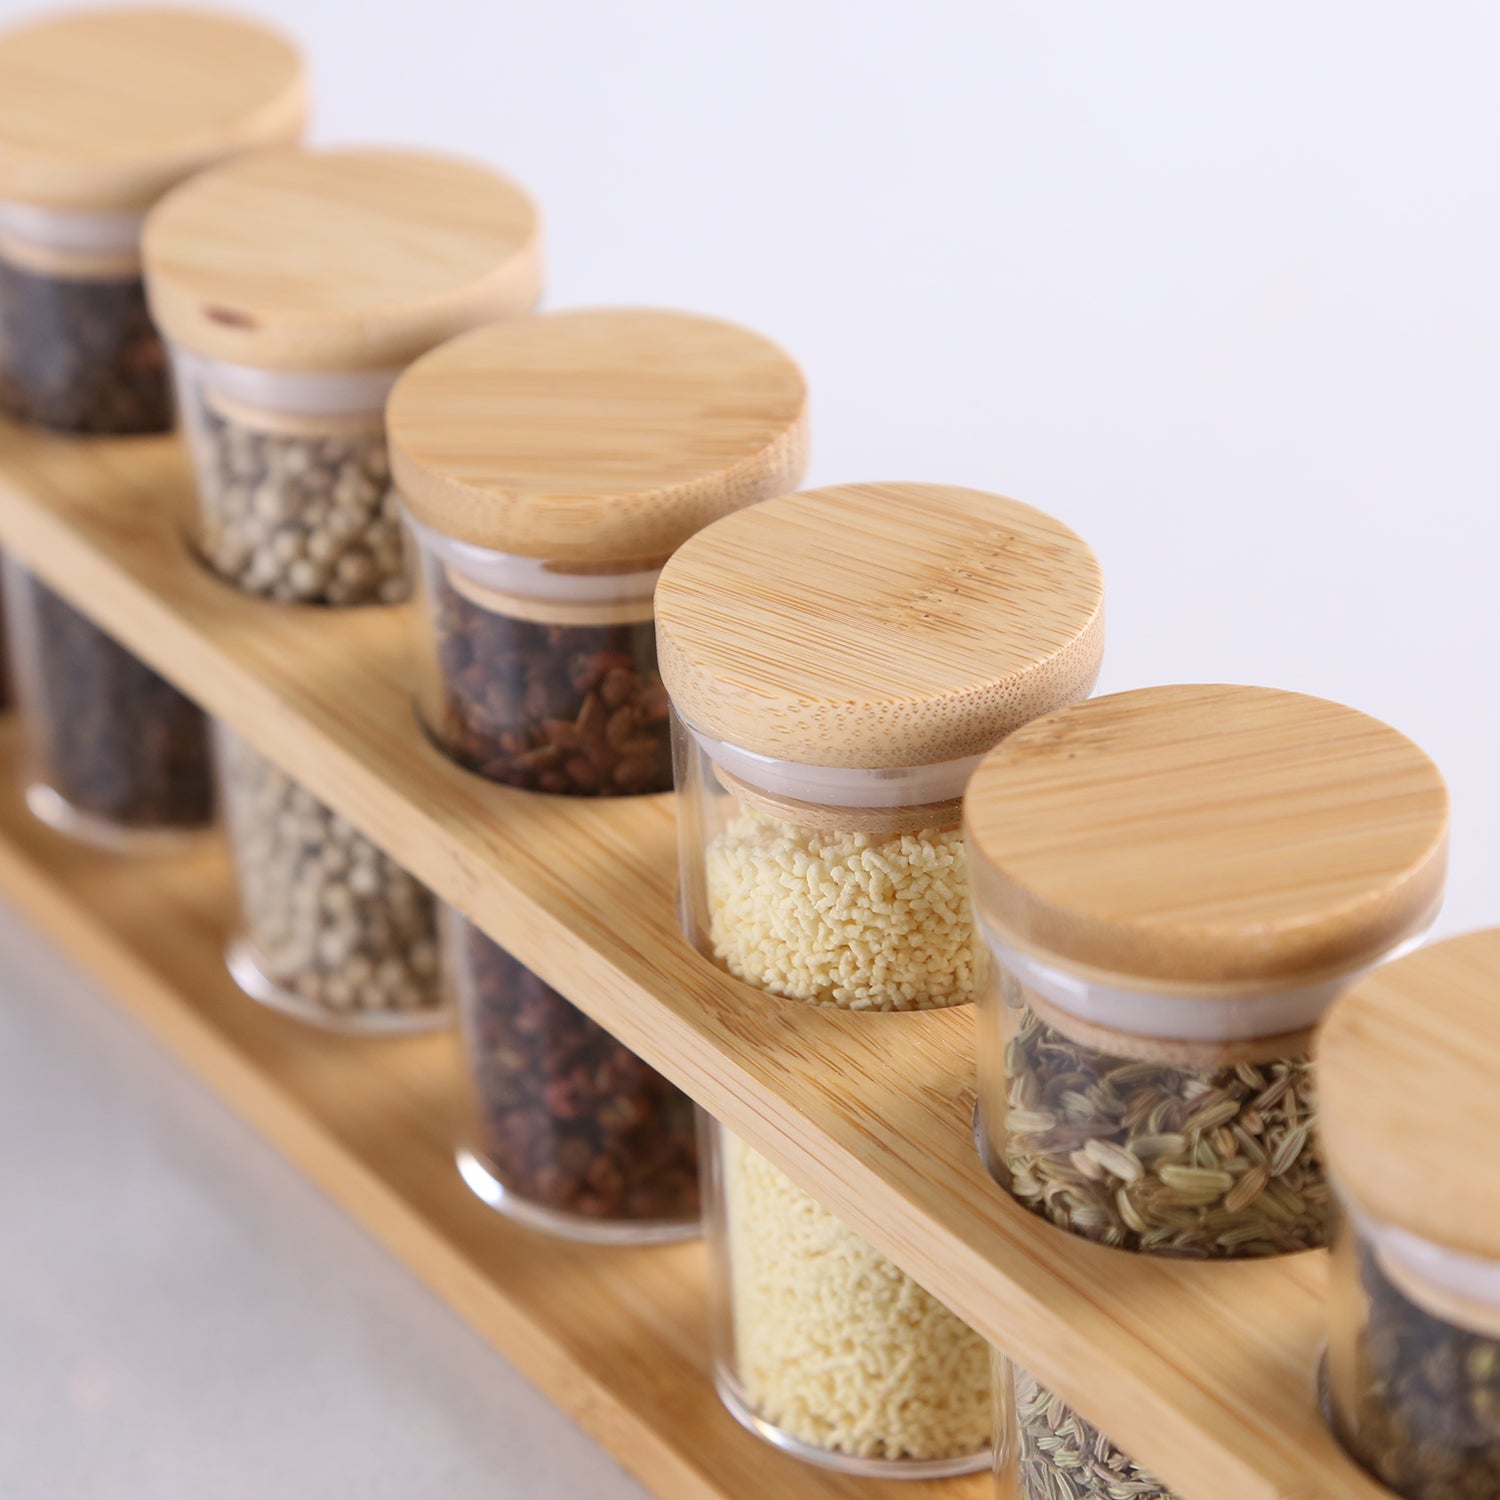 KKC 6 Piece- Eco-friendly Bamboo Lid Glass Spice Jar Set， Bamboo Shelf and  one spoon For Spices, Seasoning, Herb Storage and Kitchen Organization.